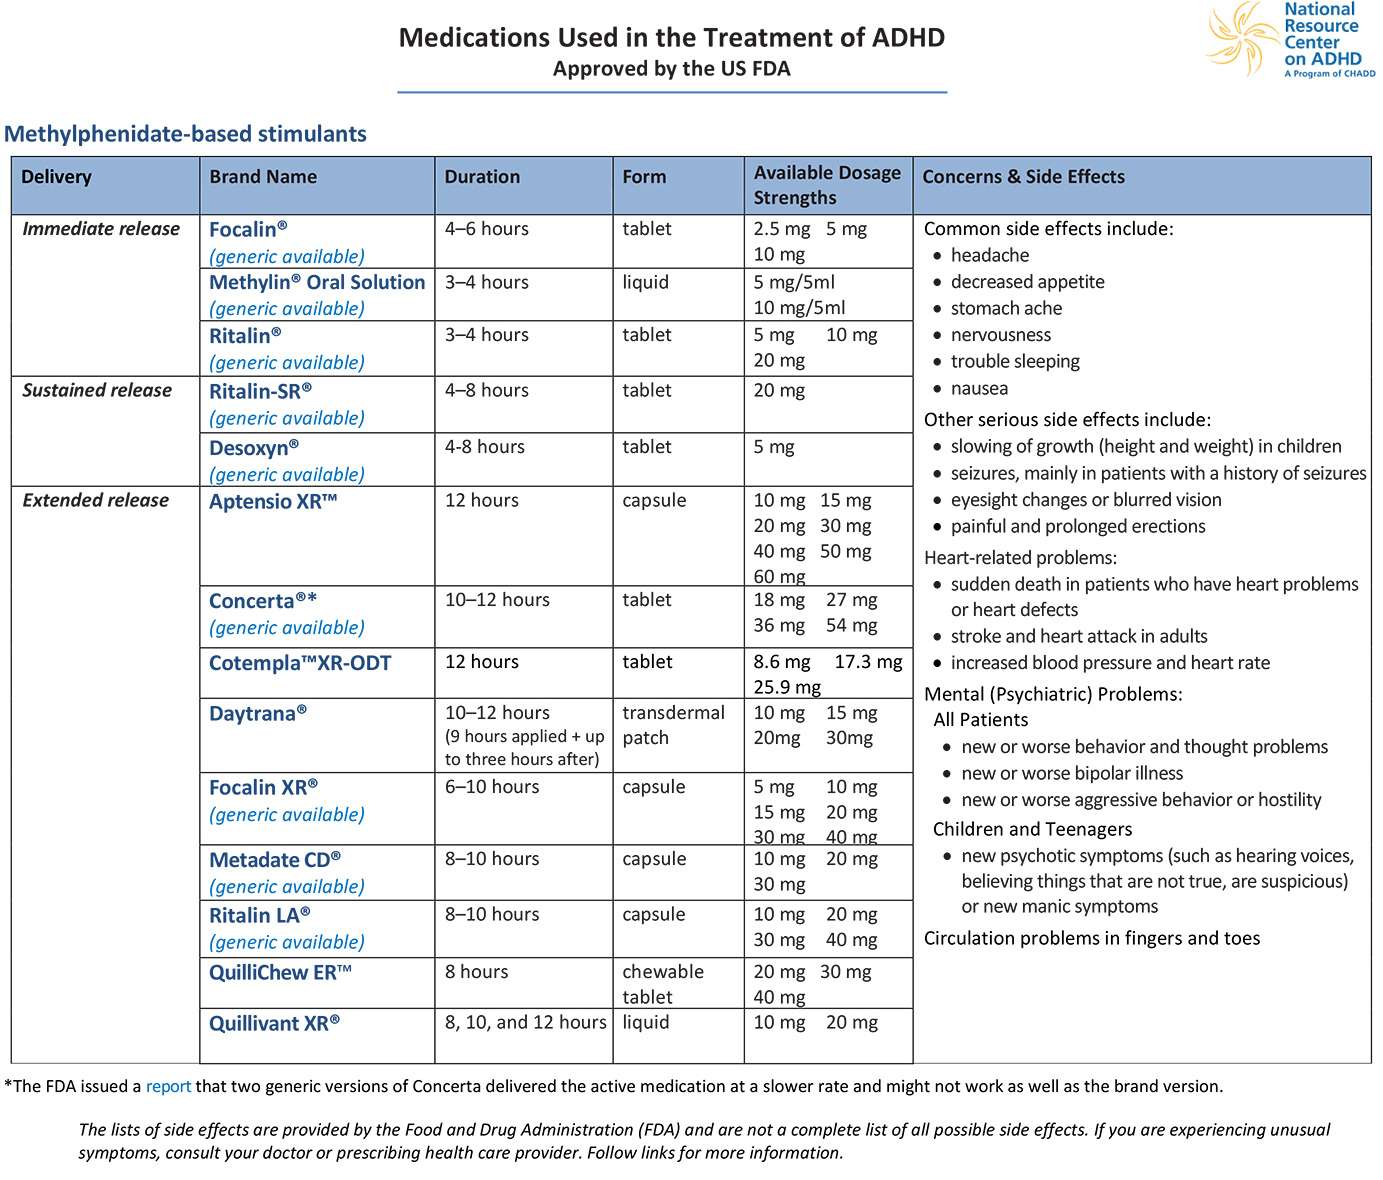 Medications Used in the Treatment of ADHD